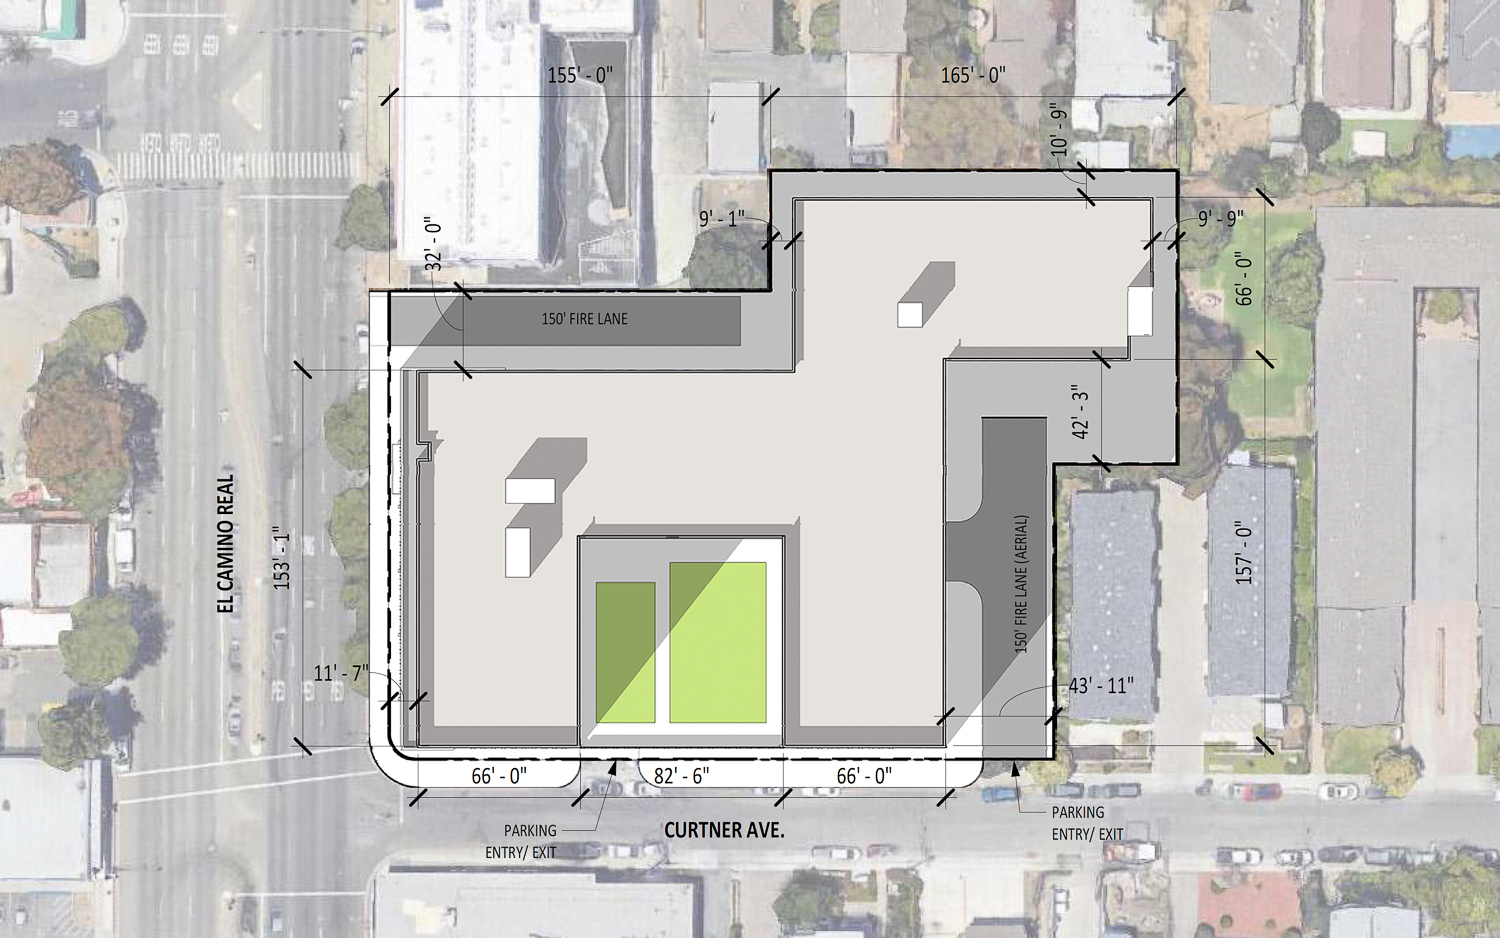 3781 El Camino Real site map, illustration by Lowney Architecture